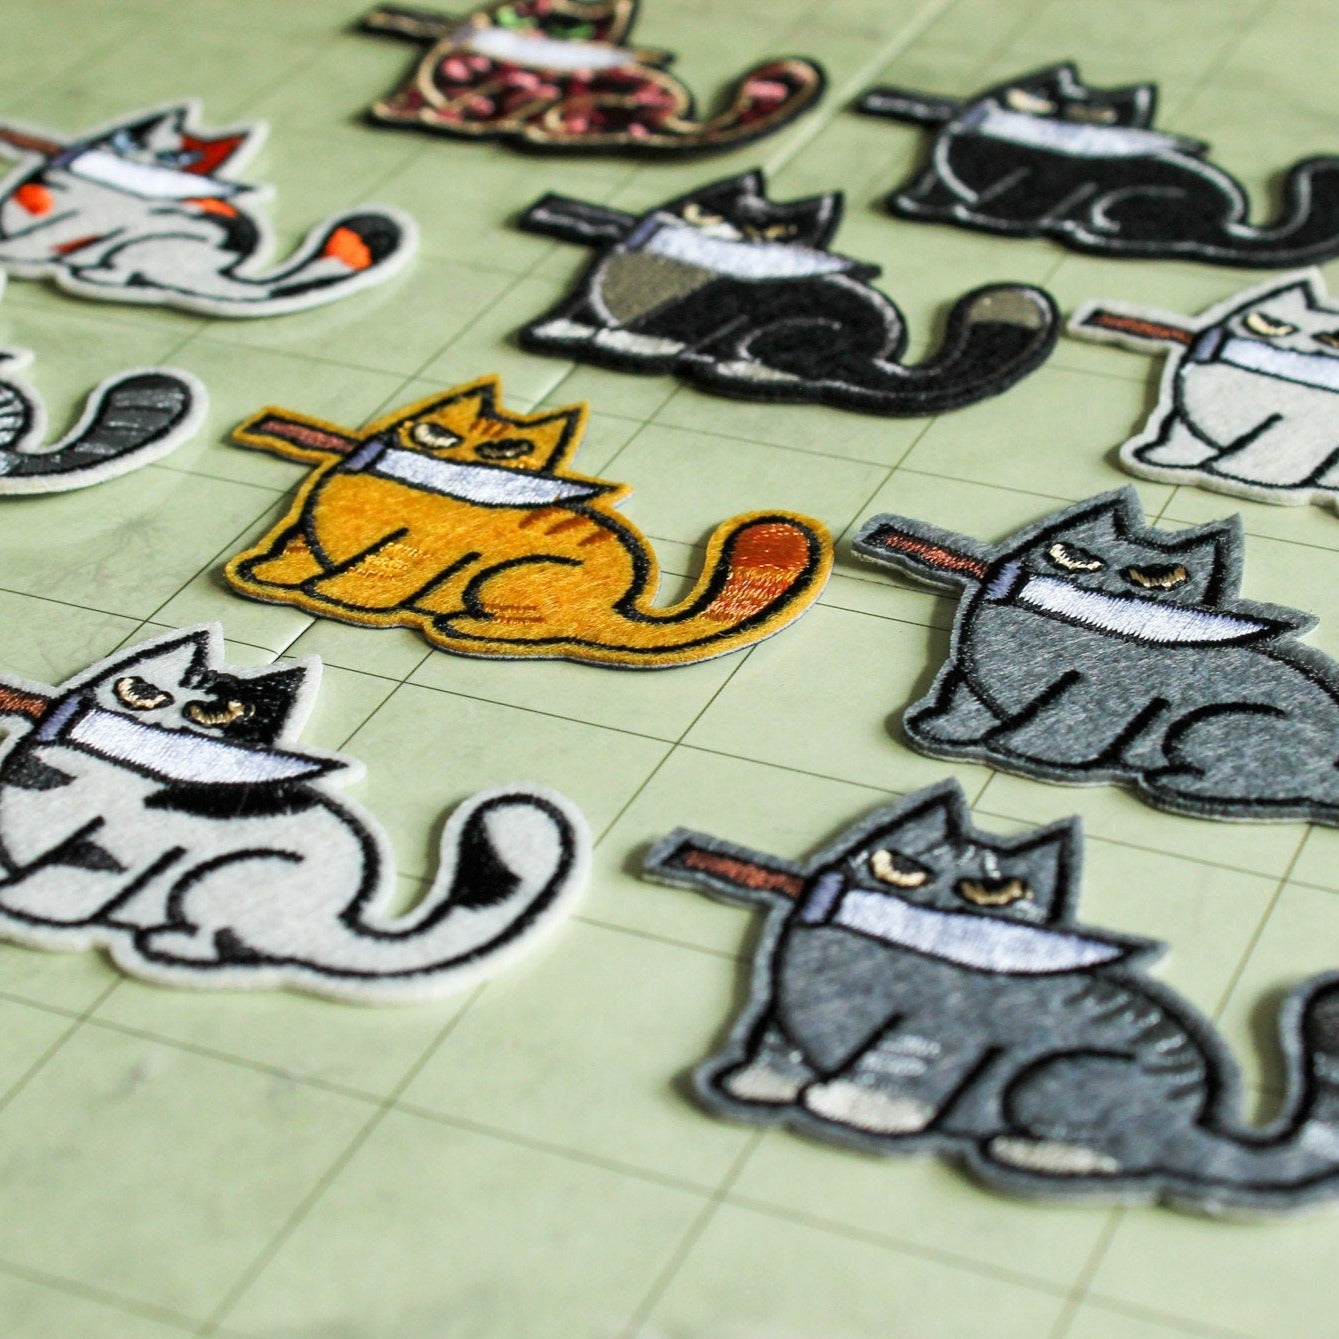 Mystery Dagger Cat Patch Dungeons & Dragons Dungeon Embroidered Cat Patch - DnD - Humorous Cute Dnd - MysteryDiceGoblins